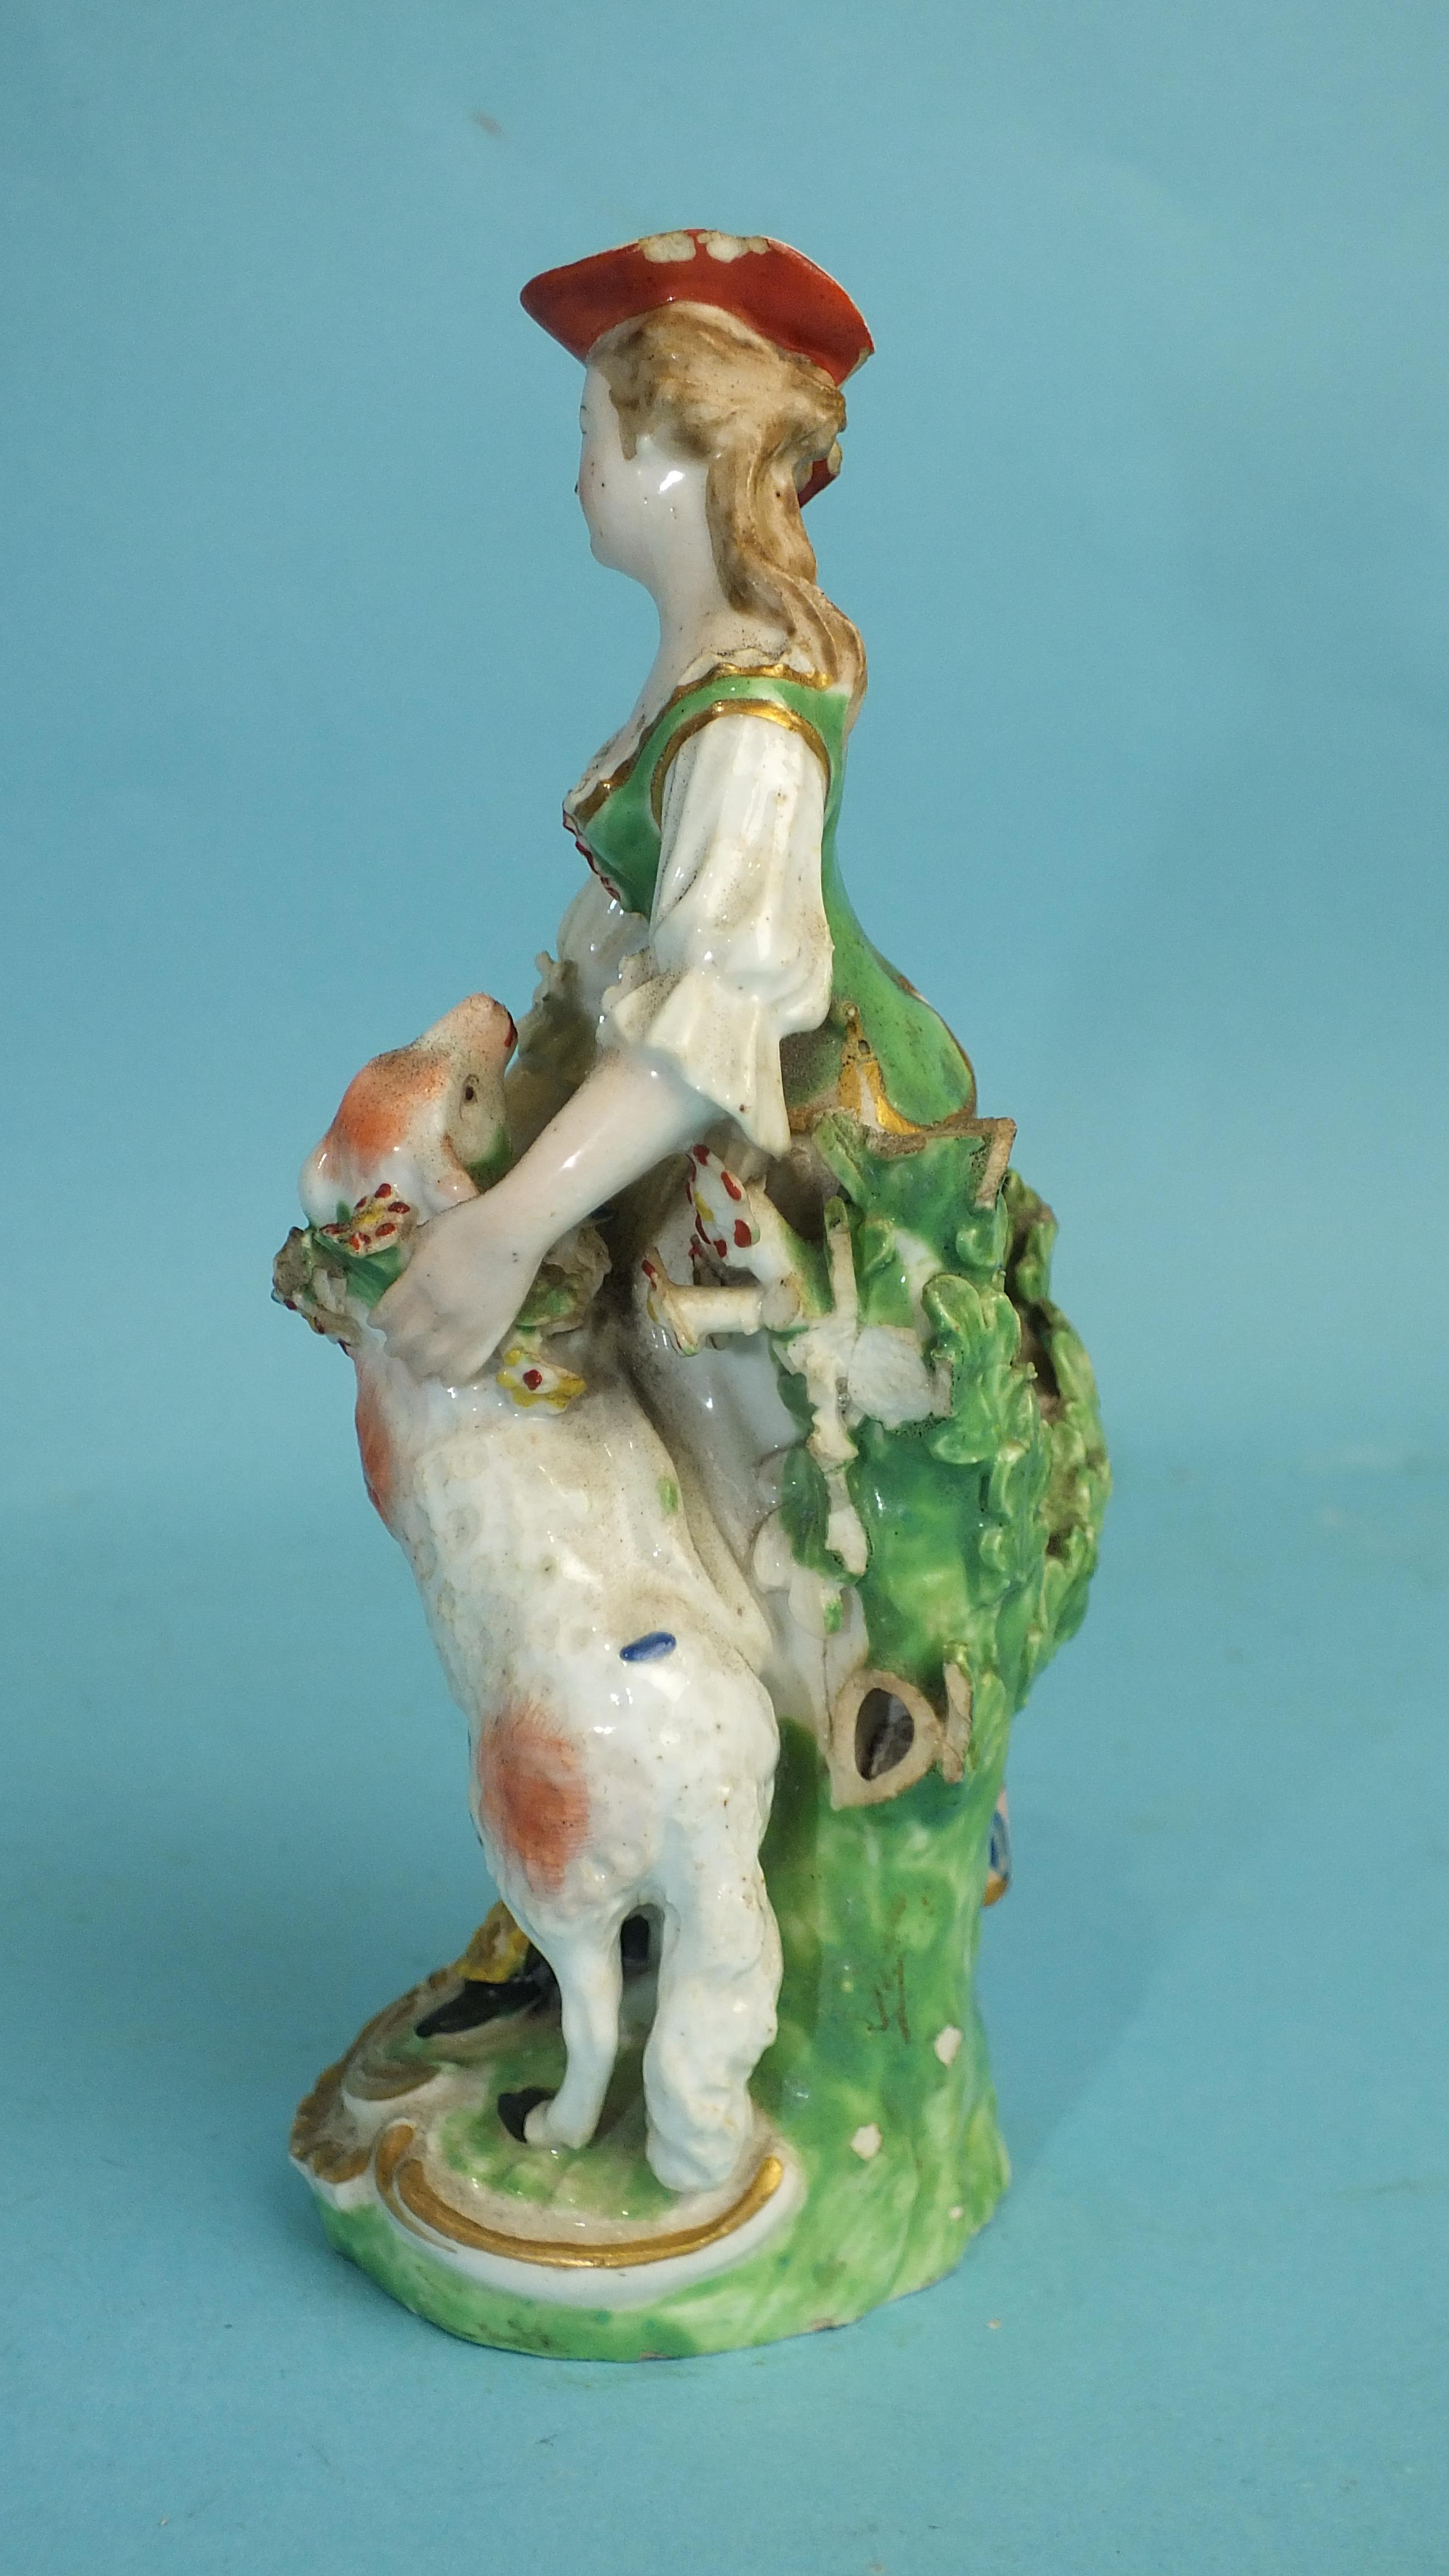 An early-19th century Derby porcelain figure of a seated gentleman playing pipes, 18cm high and a - Image 8 of 9